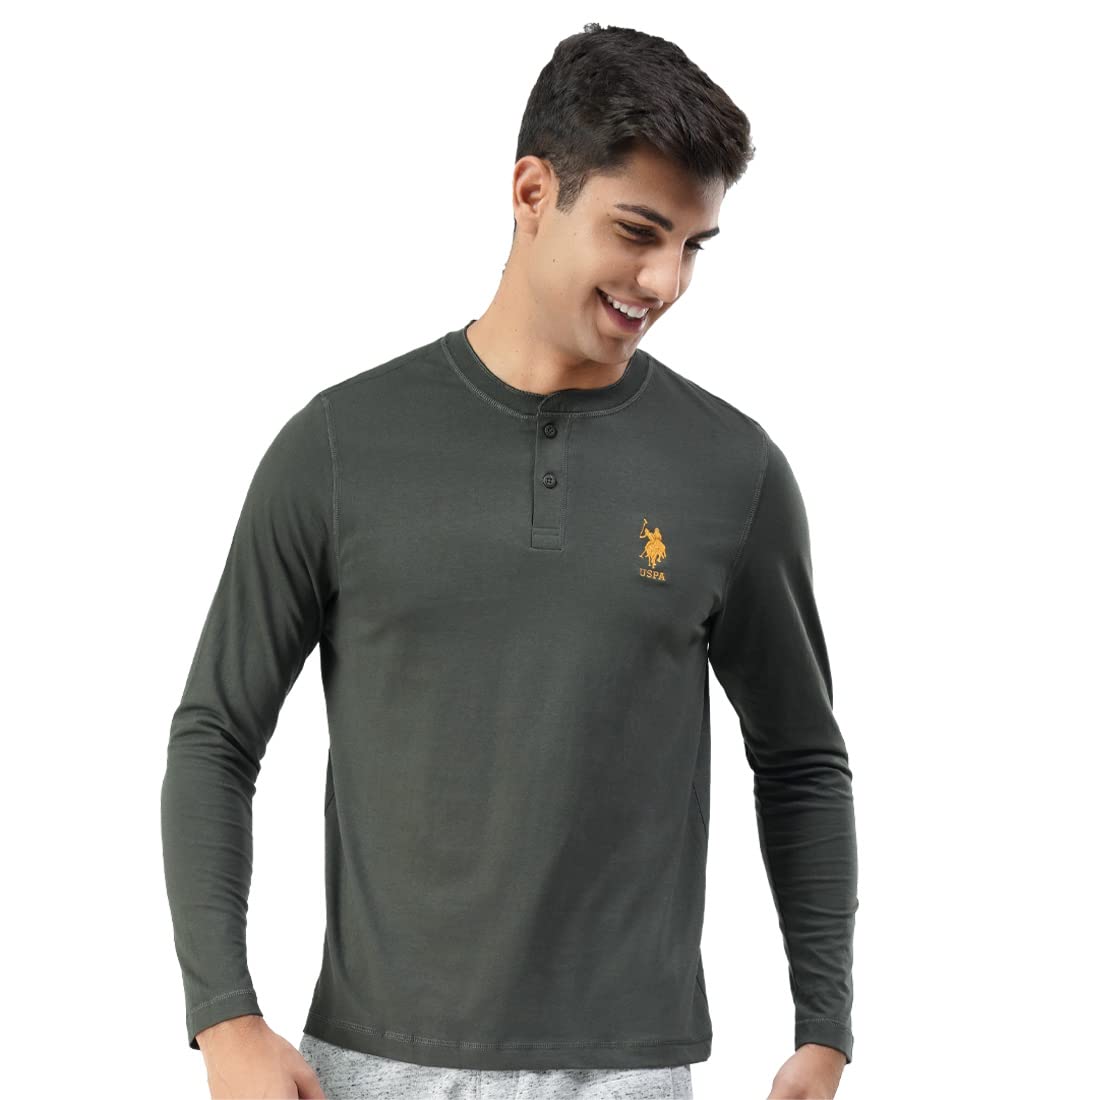 U.S. POLO ASSN. Men Comfort Fit Heathered Cotton I655 T-Shirt - Pack of 1 (Olive L)